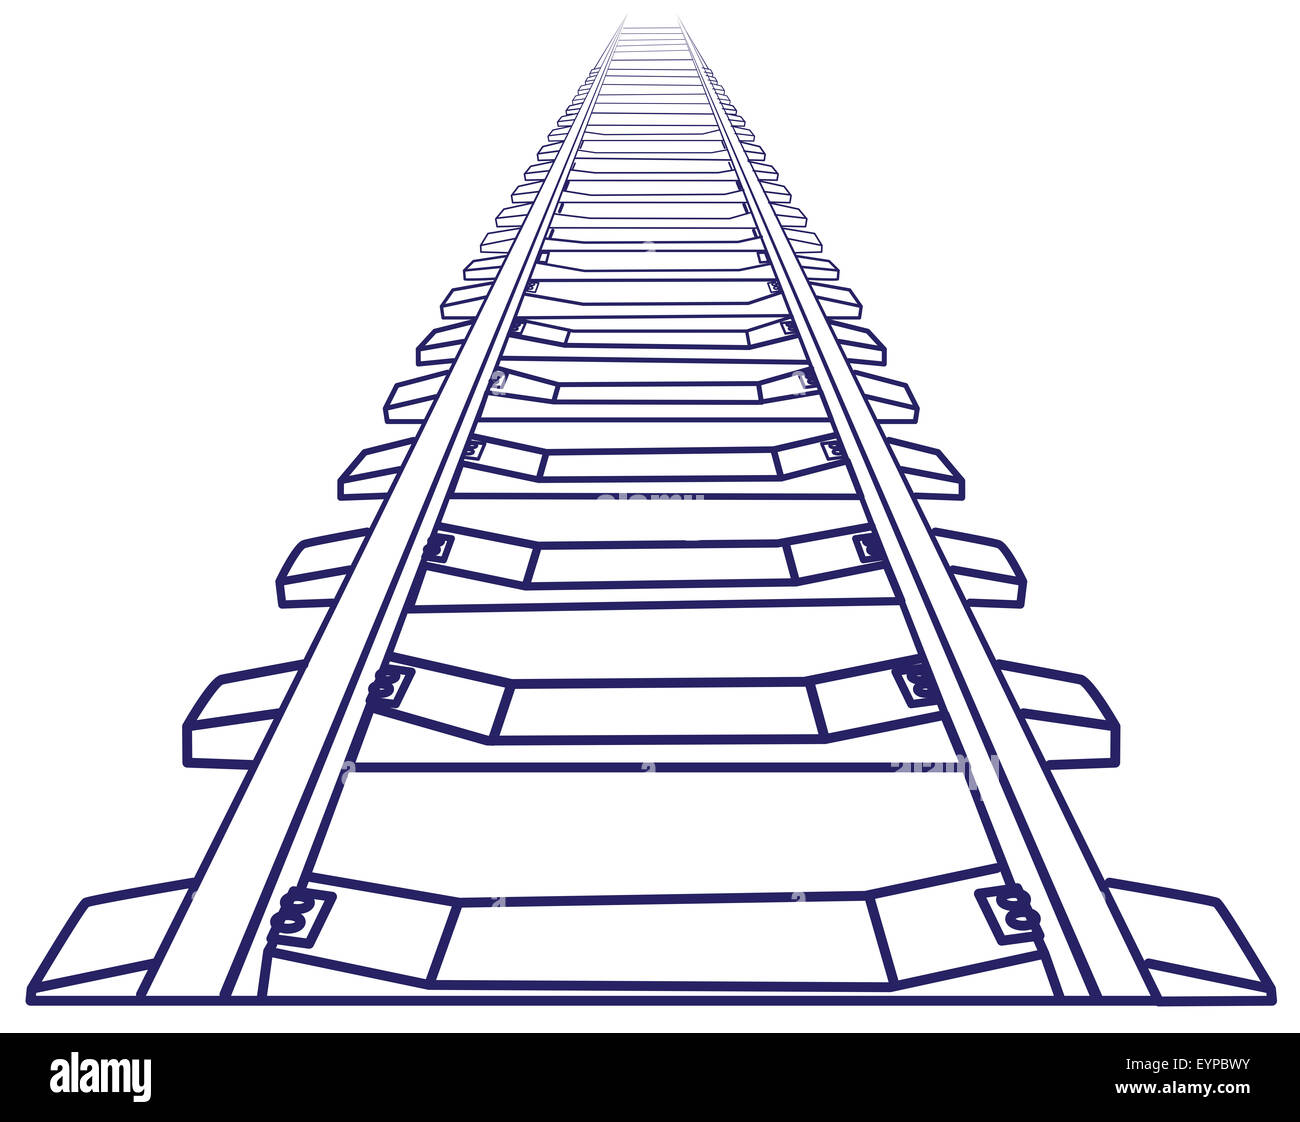 Perspective view of straight Train track. Sketch Outlines Stock Photo